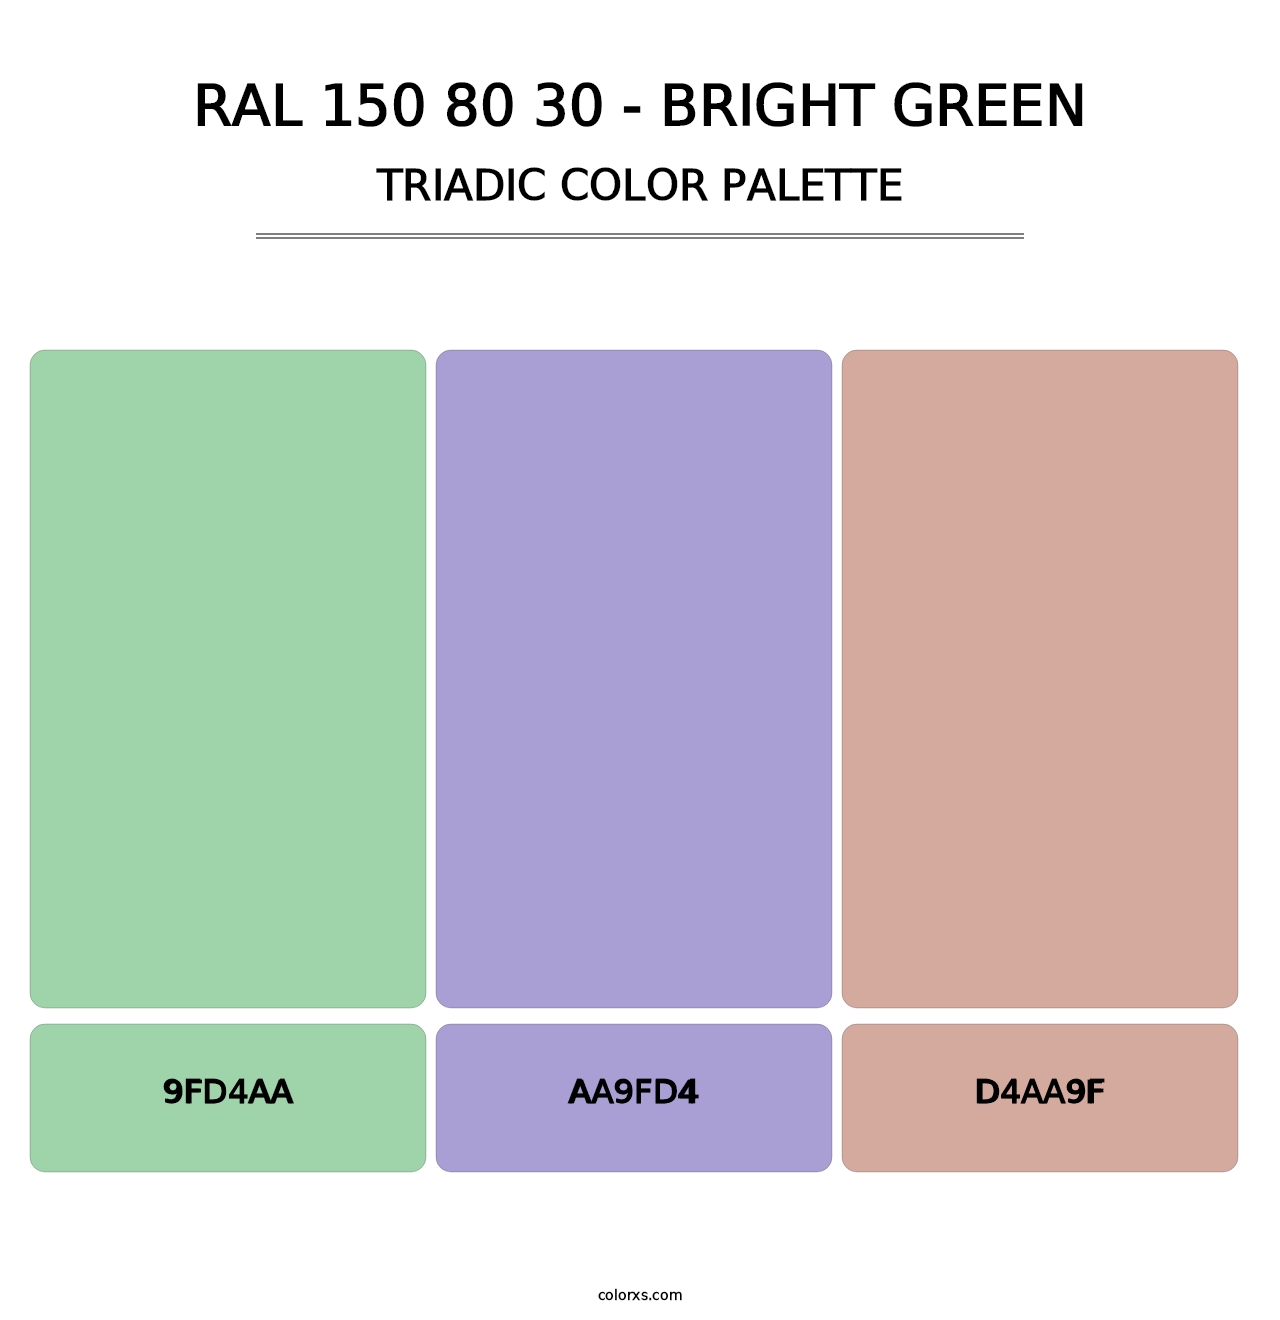 RAL 150 80 30 - Bright Green - Triadic Color Palette